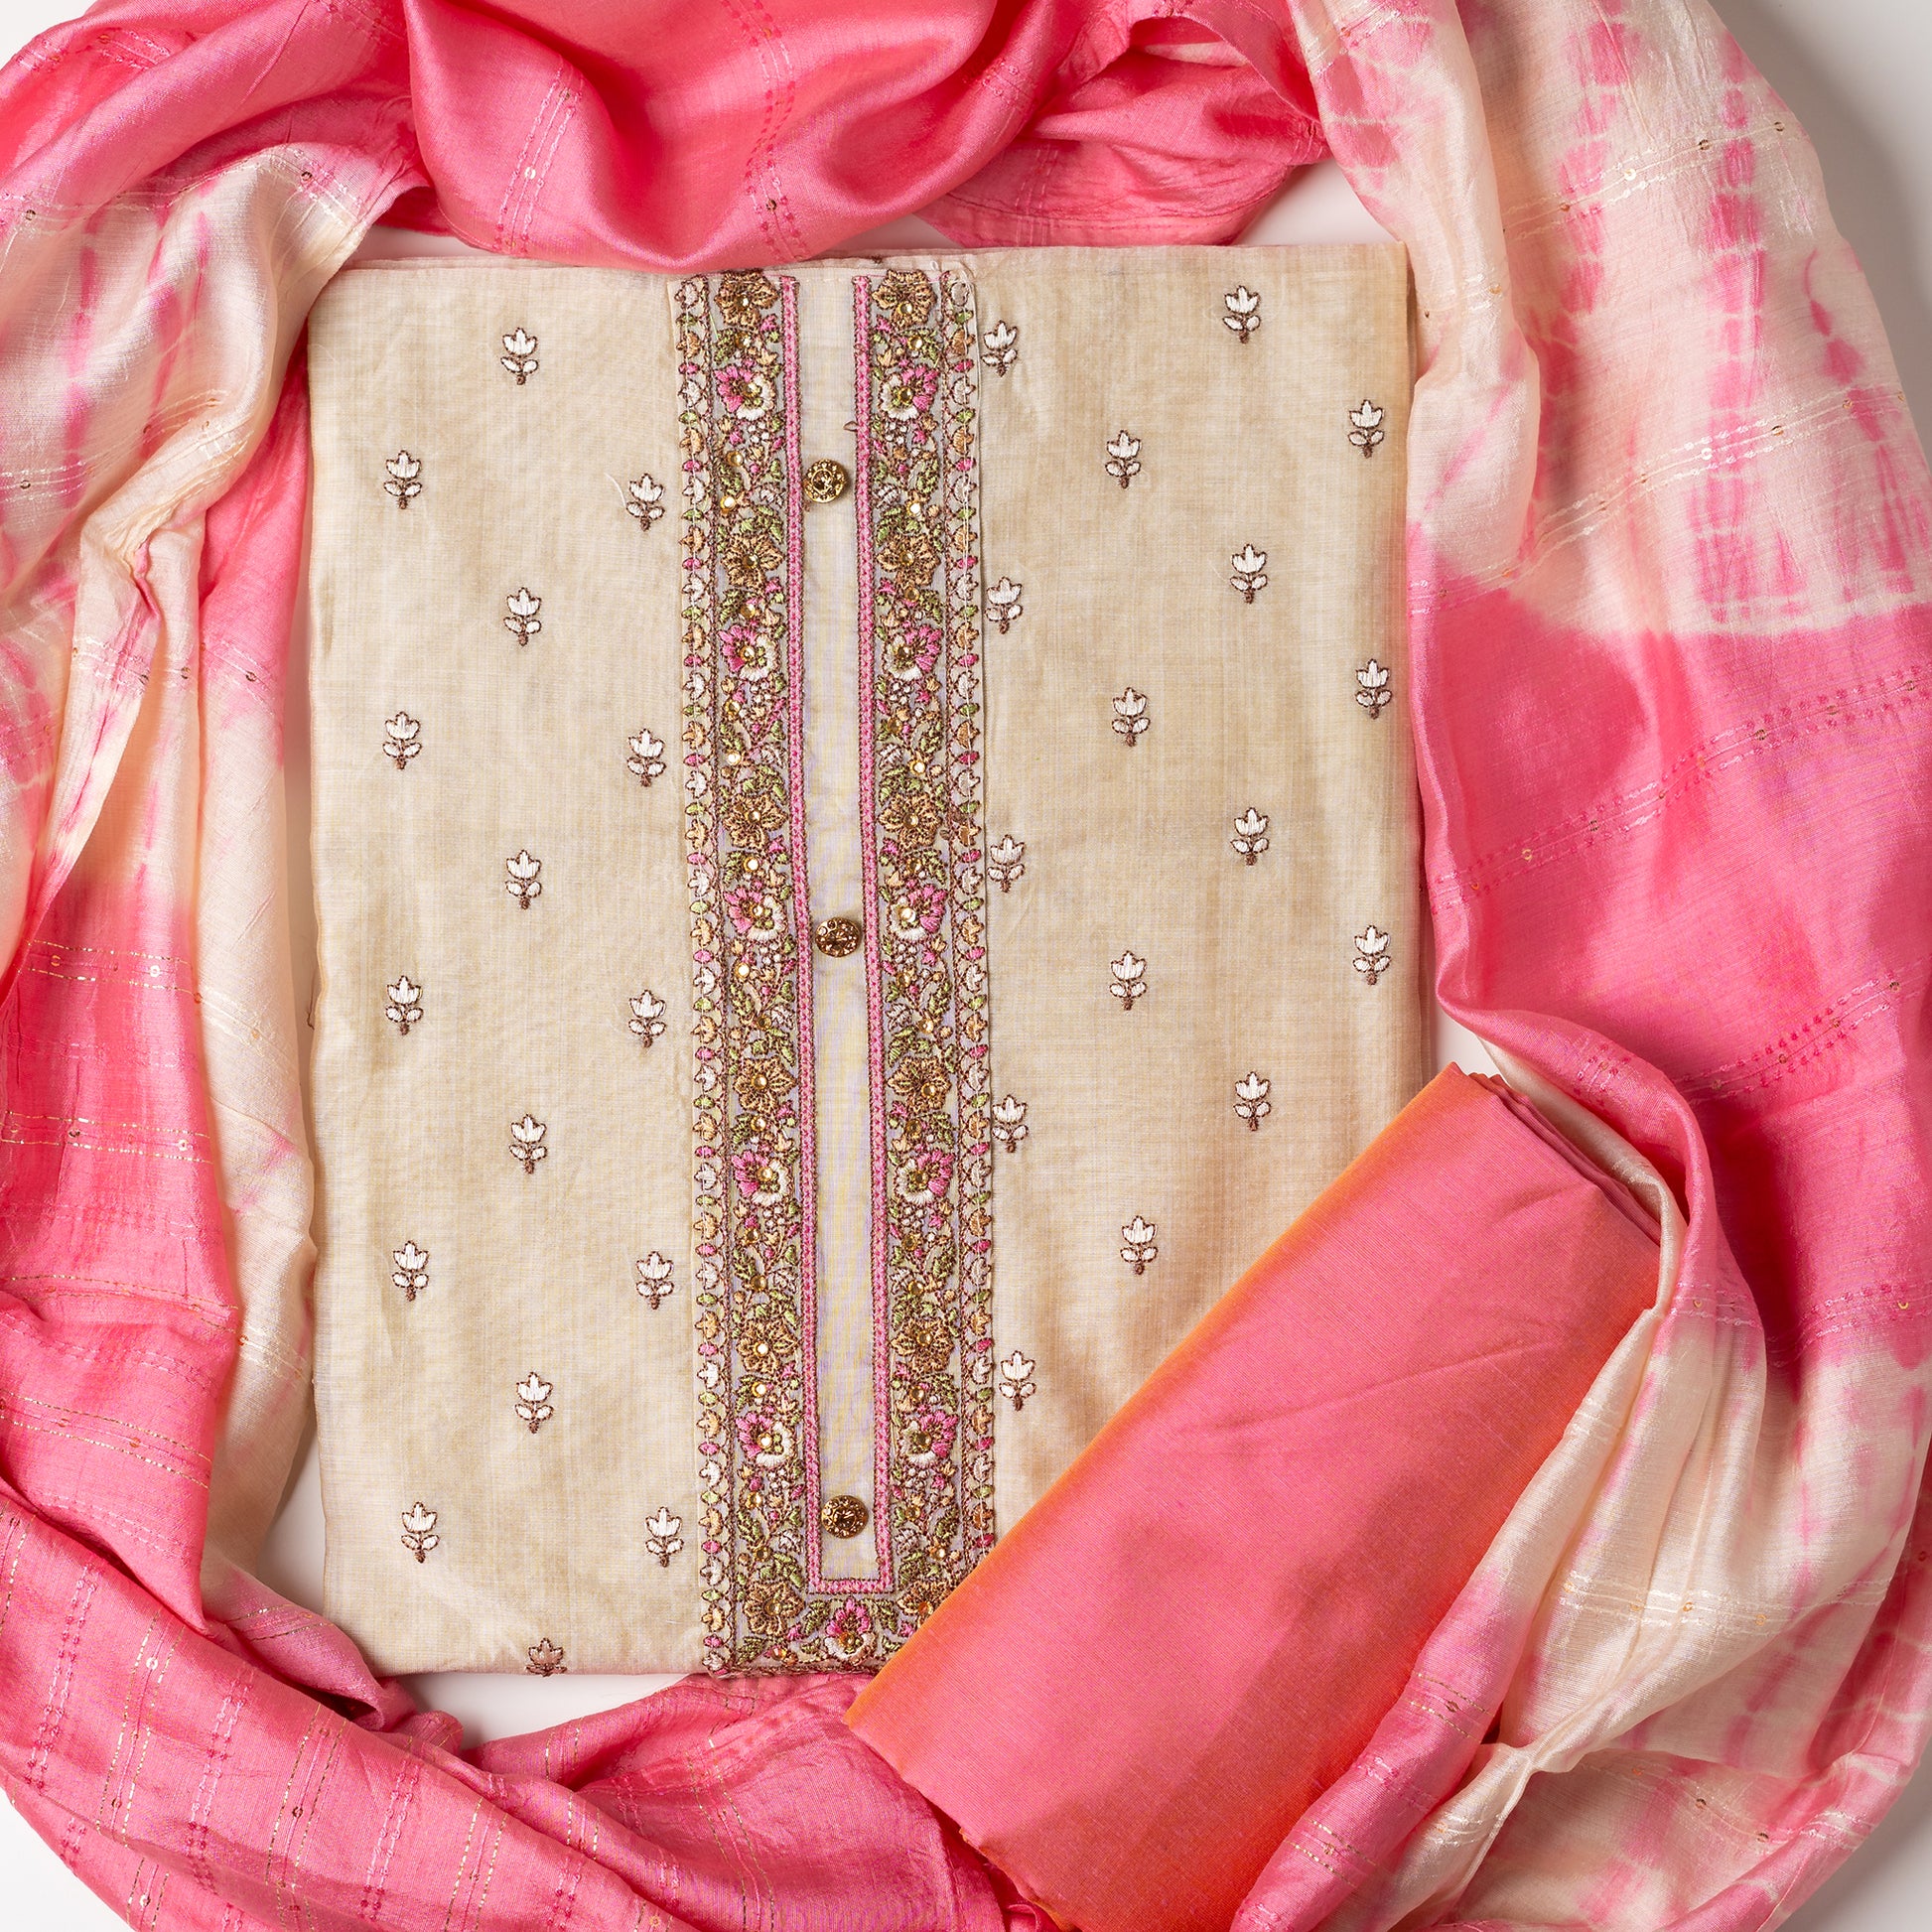 unstitched chanderi silk dress material set, Ivory color Chanderi Silk top with self color floral embroidery all over the body in the front and elegant pink color embroidery work in neck line with show buttons. cotton pink color plain bottom. Pink and cream color silk dupatta with sequins and thread work 